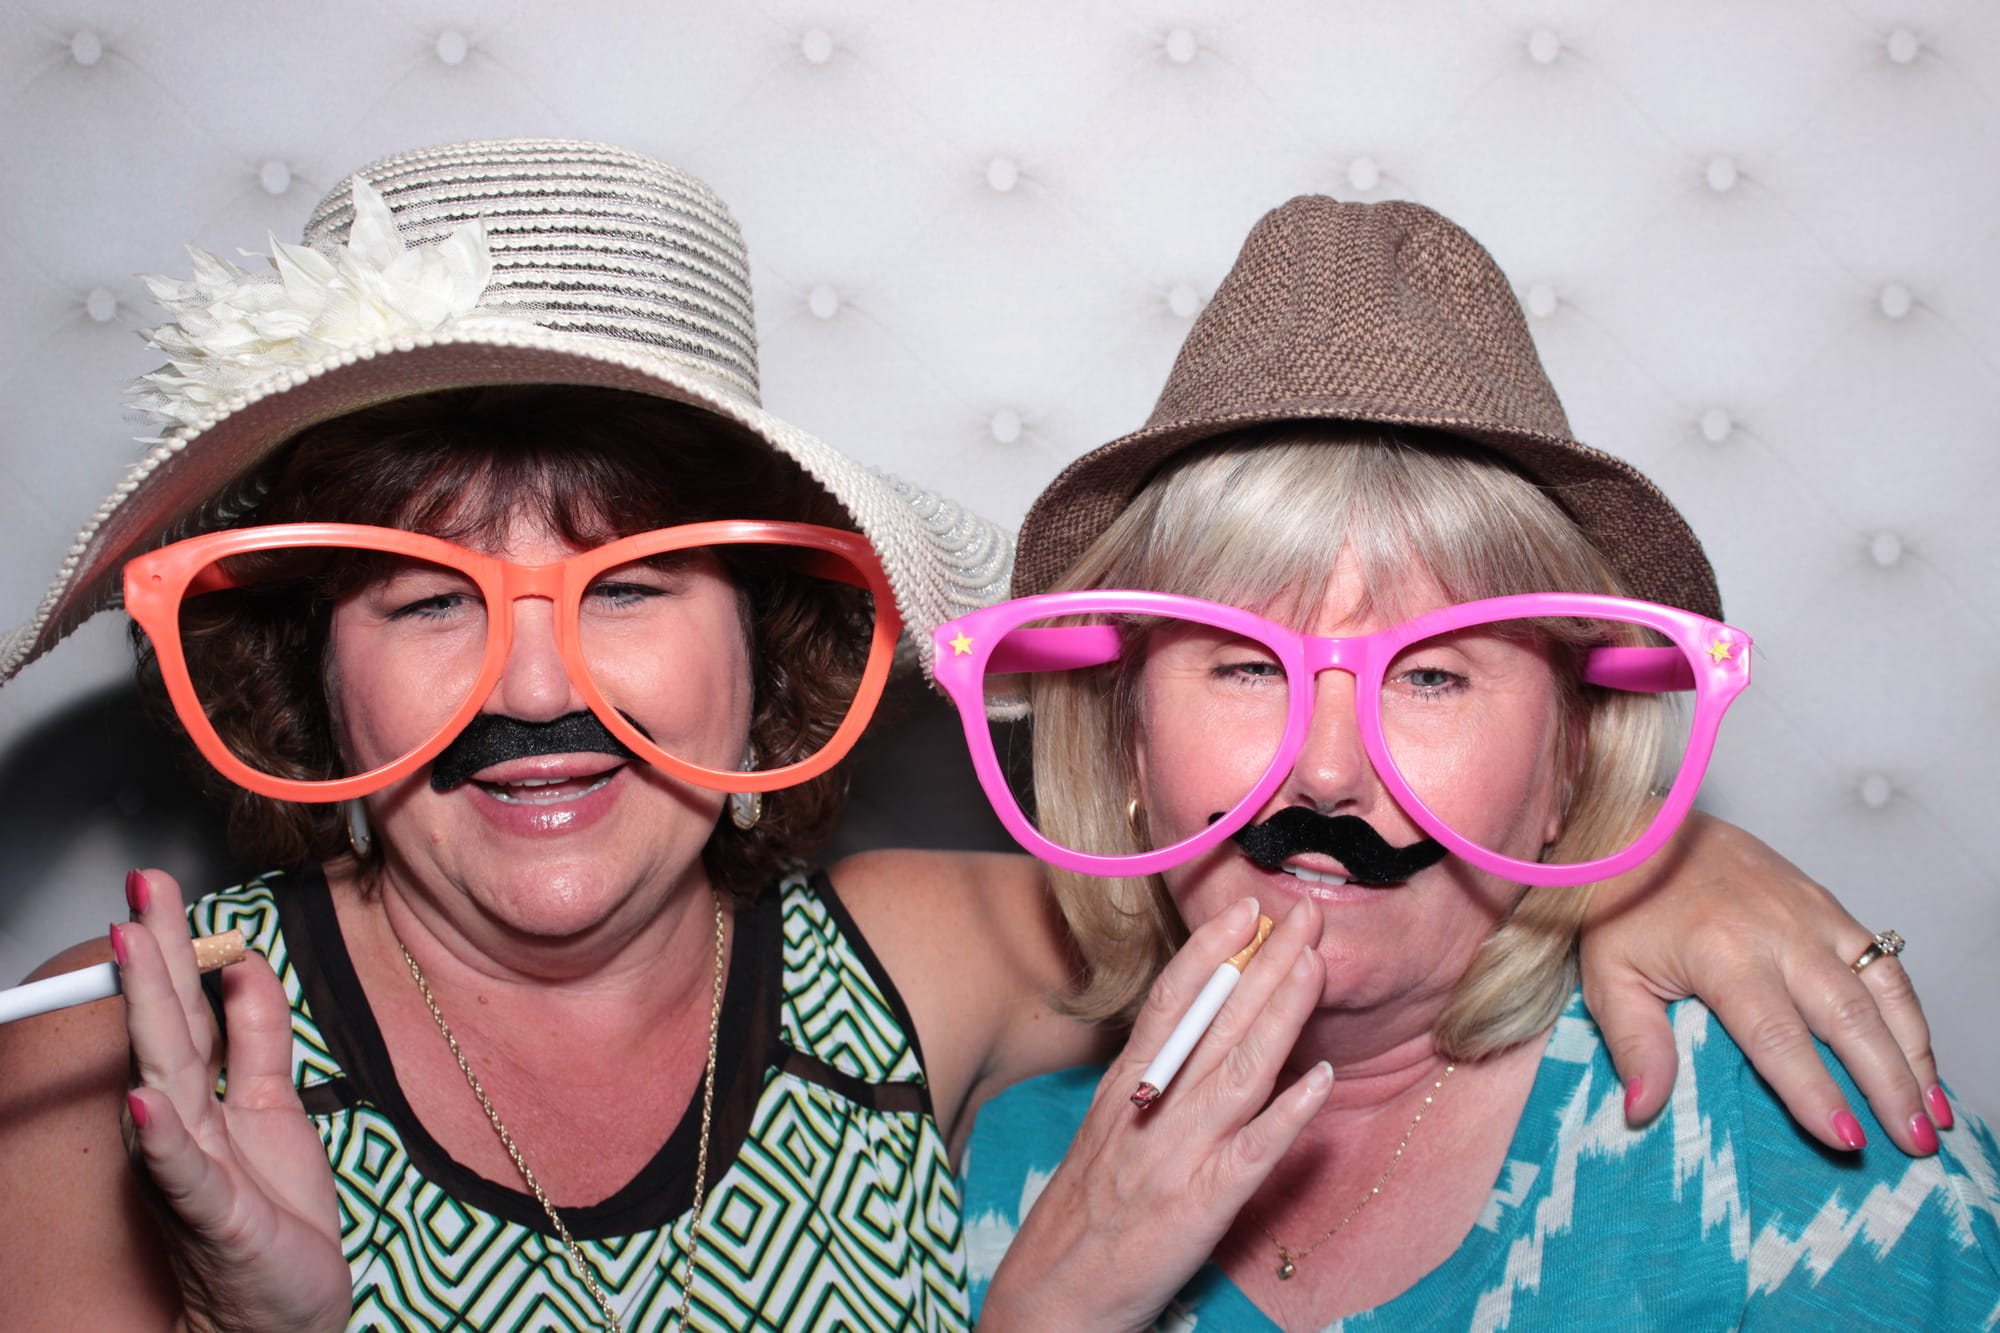 Photo-Booth-Rental-Anniversary-Party-50s-Theme-No.1-Affordable-Best-Trusted-Austin-Hill Country-ATX DJ-Live Oak DJ